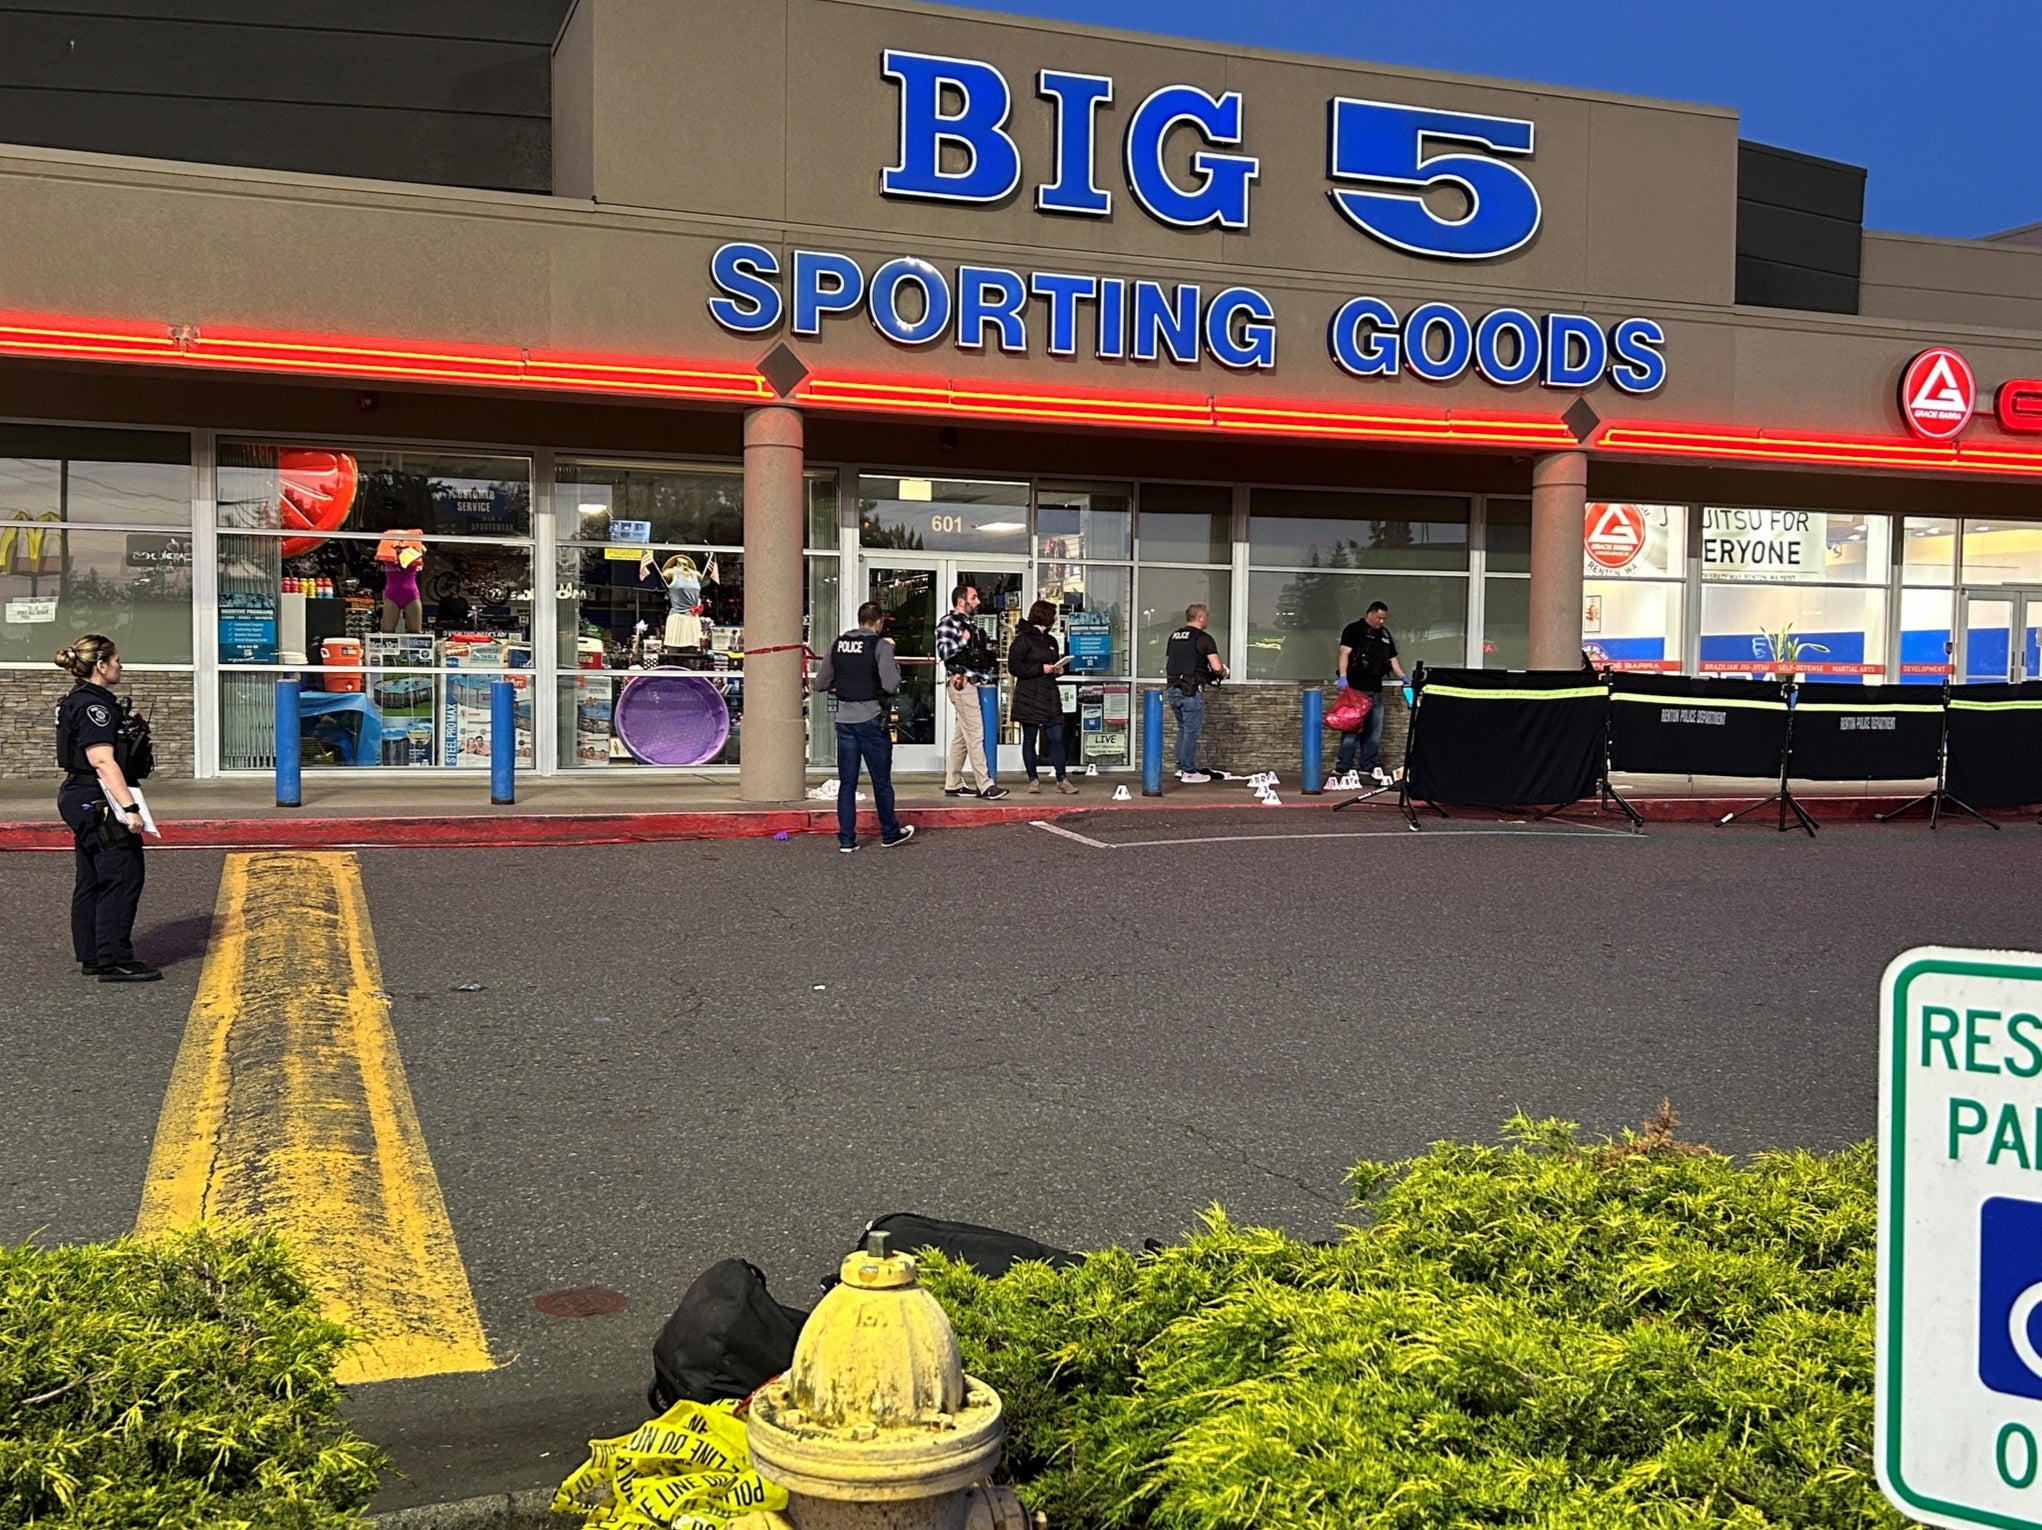 The Big 5 Sporting Goods store where the shooting took place